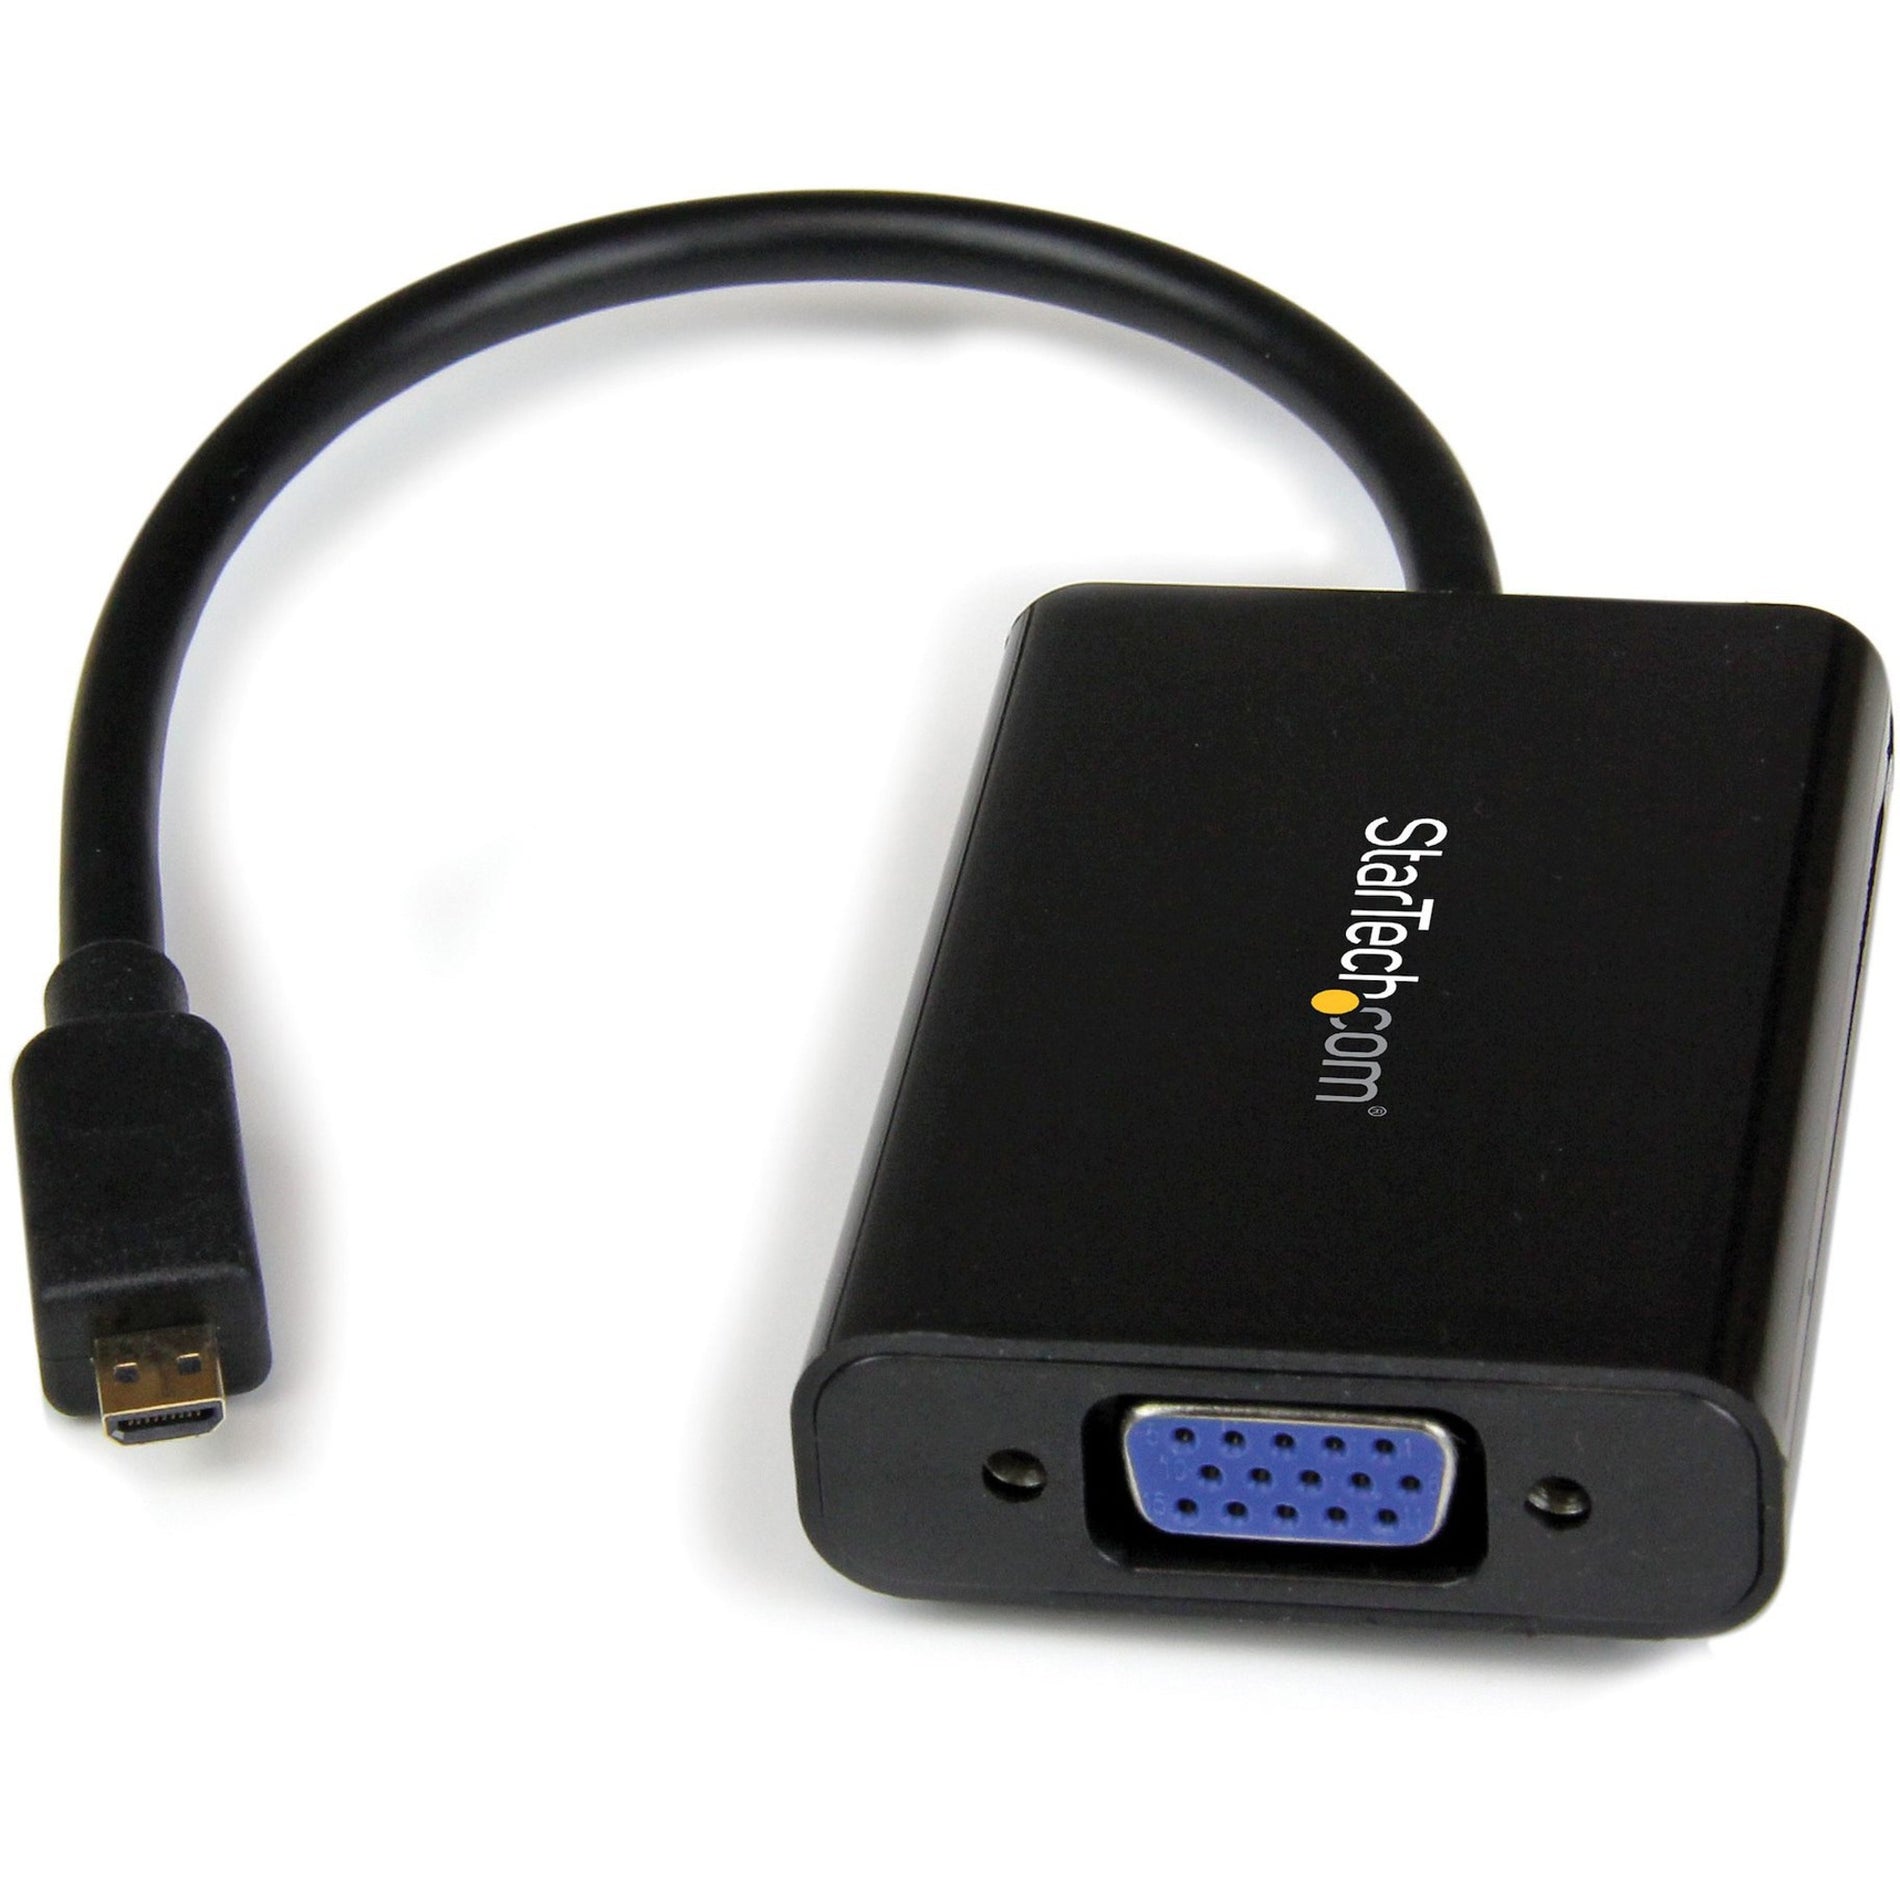 StarTech.com MCHD2VGAA2 Micro HDMI to VGA Adapter Converter, 1920x1200, with Audio for Smartphones, Ultrabooks, Tablets